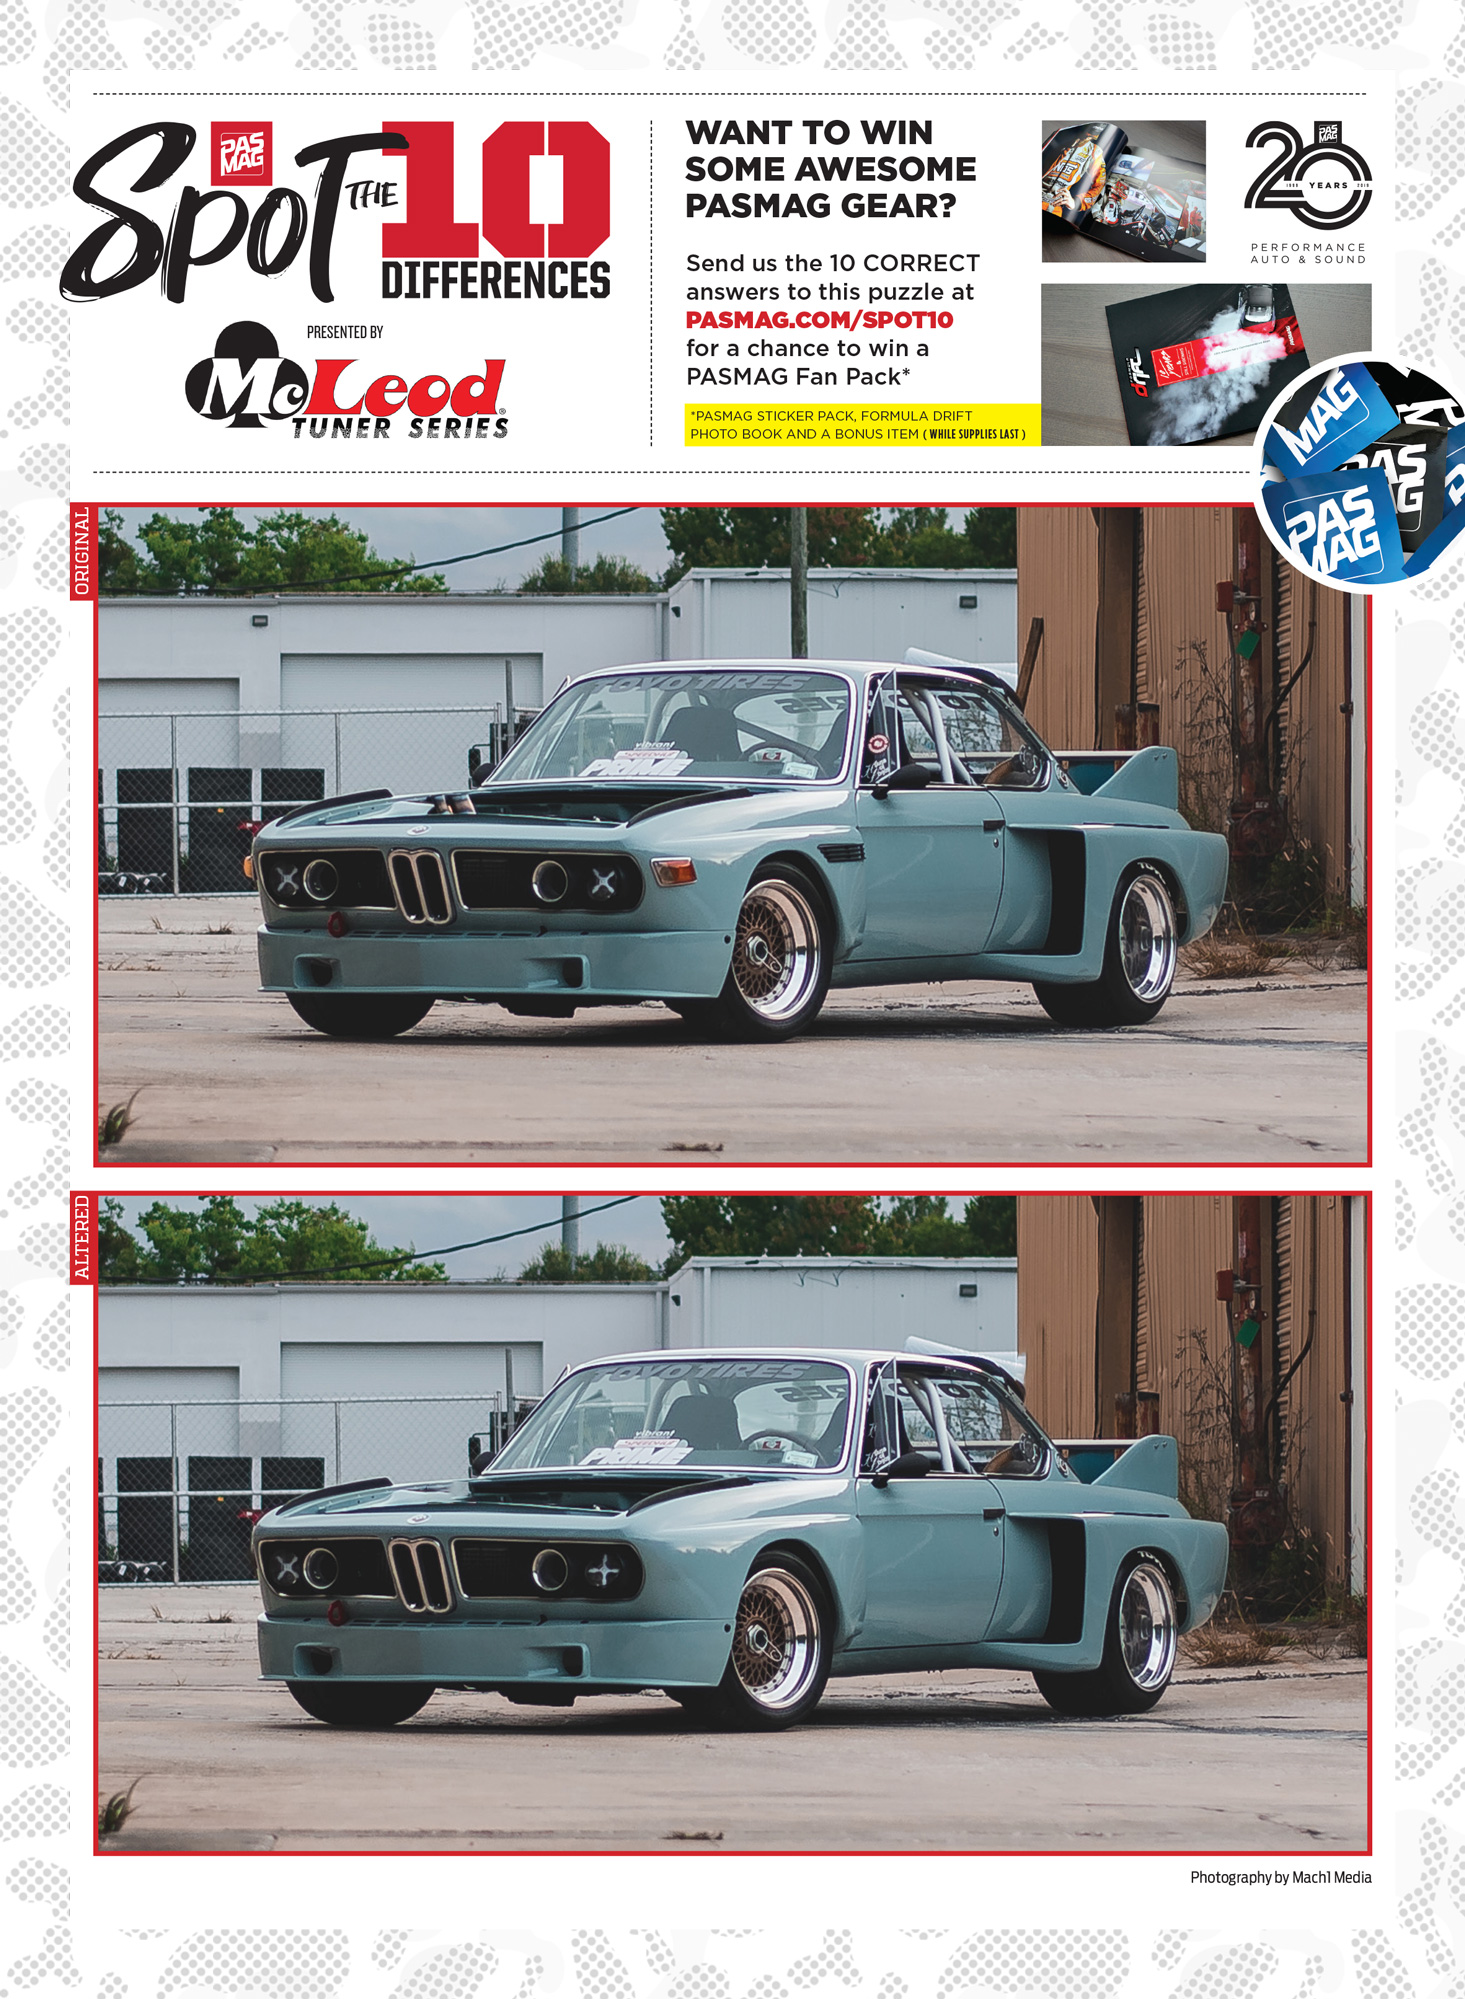 PASMAG Spot the Differences May 6 2020 Willy Izaguirre 1973 BMW CSL pasmag